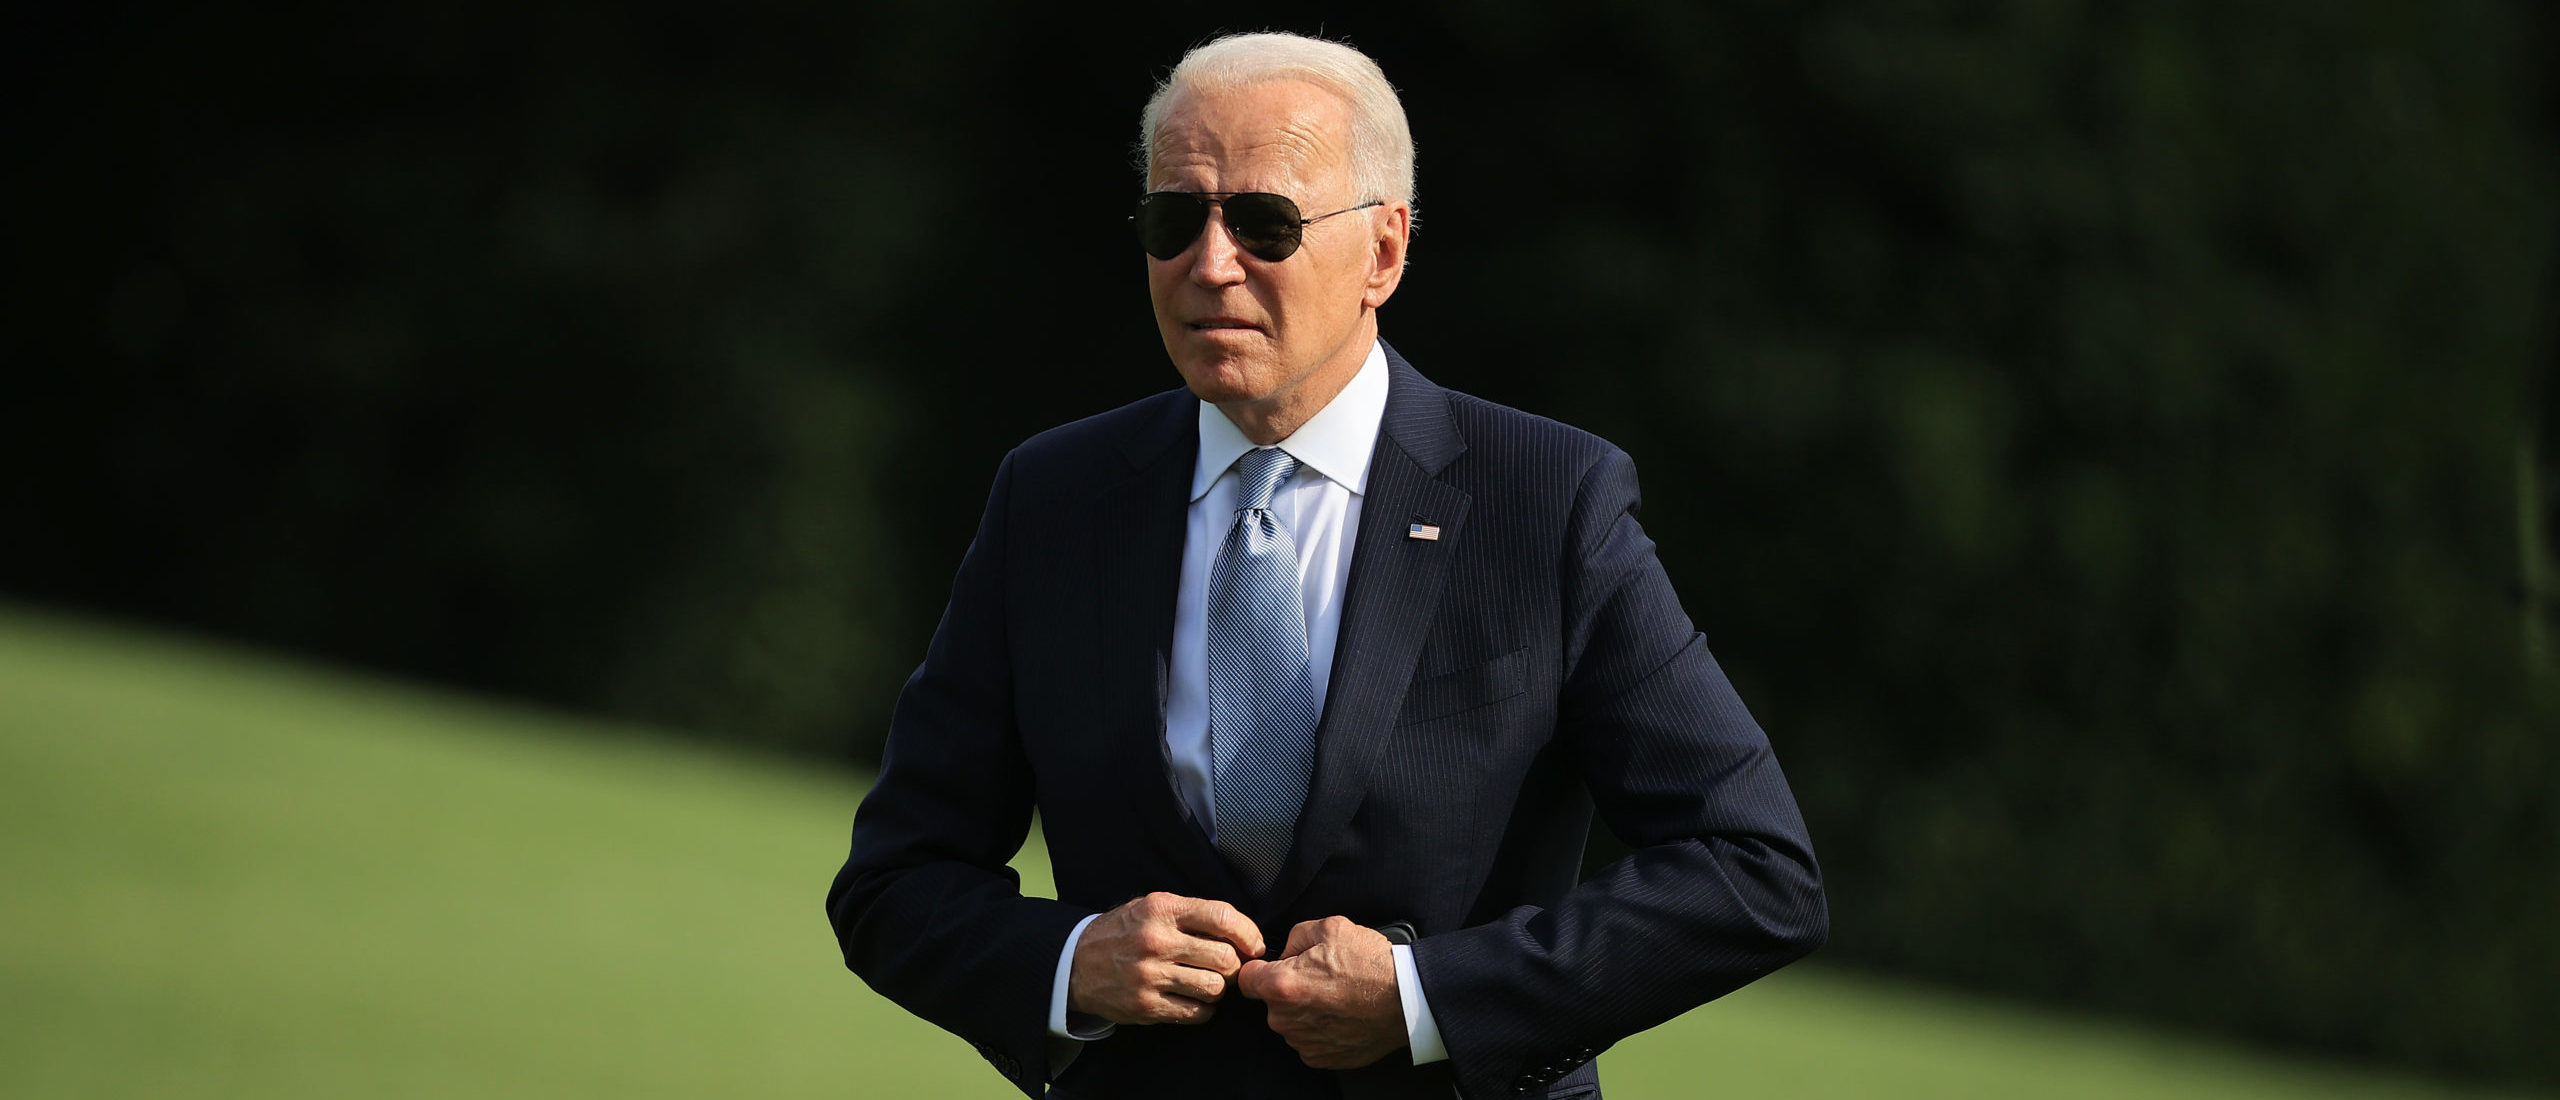 U.S. President Joe Biden walks across the South Lawn as he returns to the White House on July 13, 2021 in Washington, DC. (Photo by Chip Somodevilla/Getty Images)